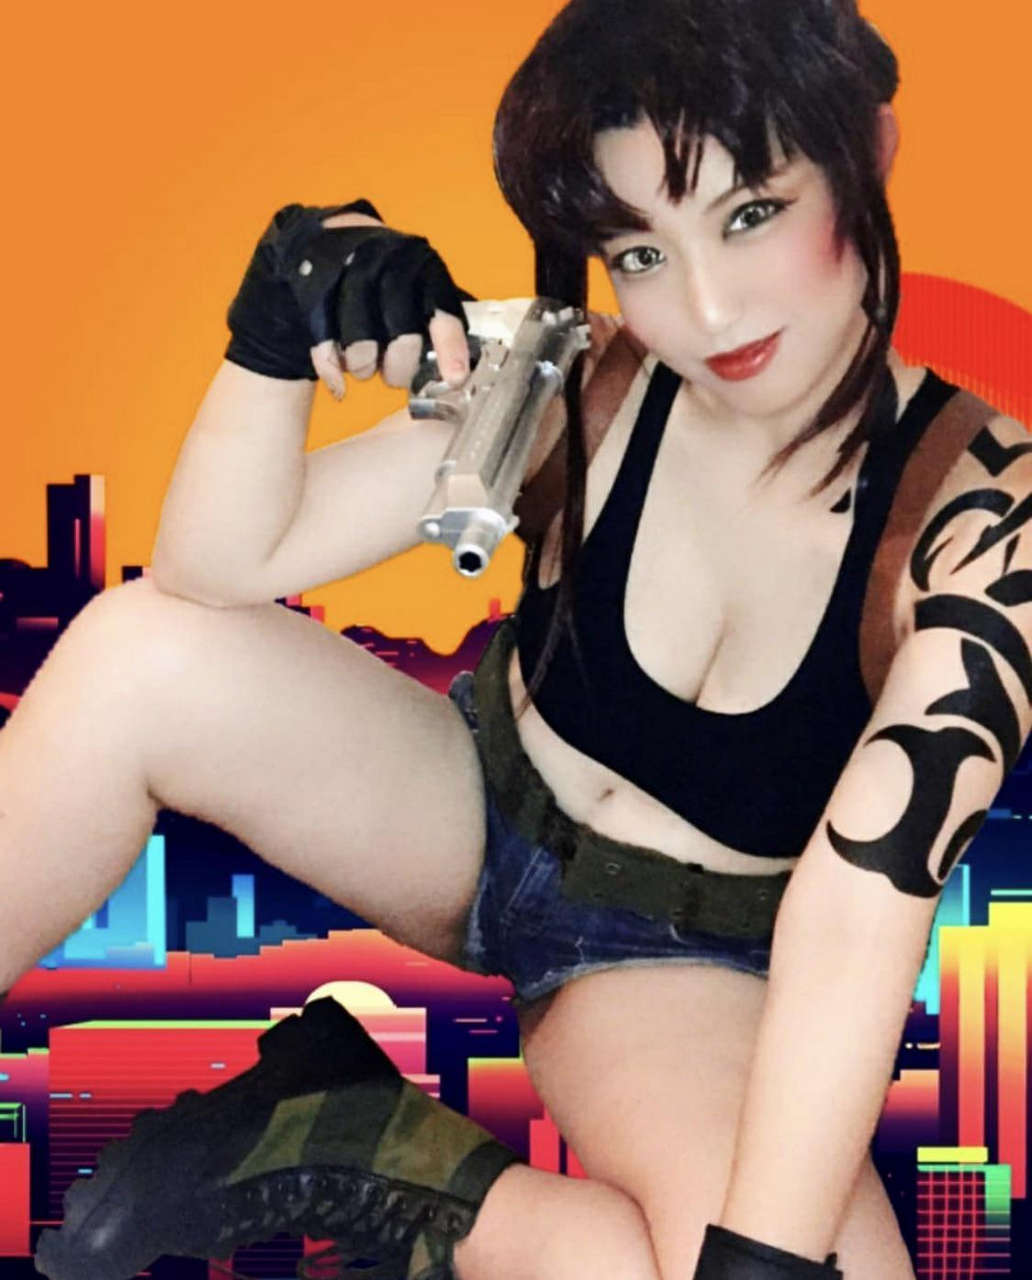 Revy From Black Lagoon Cosplay Done By Rye Cosplaying On Instagram